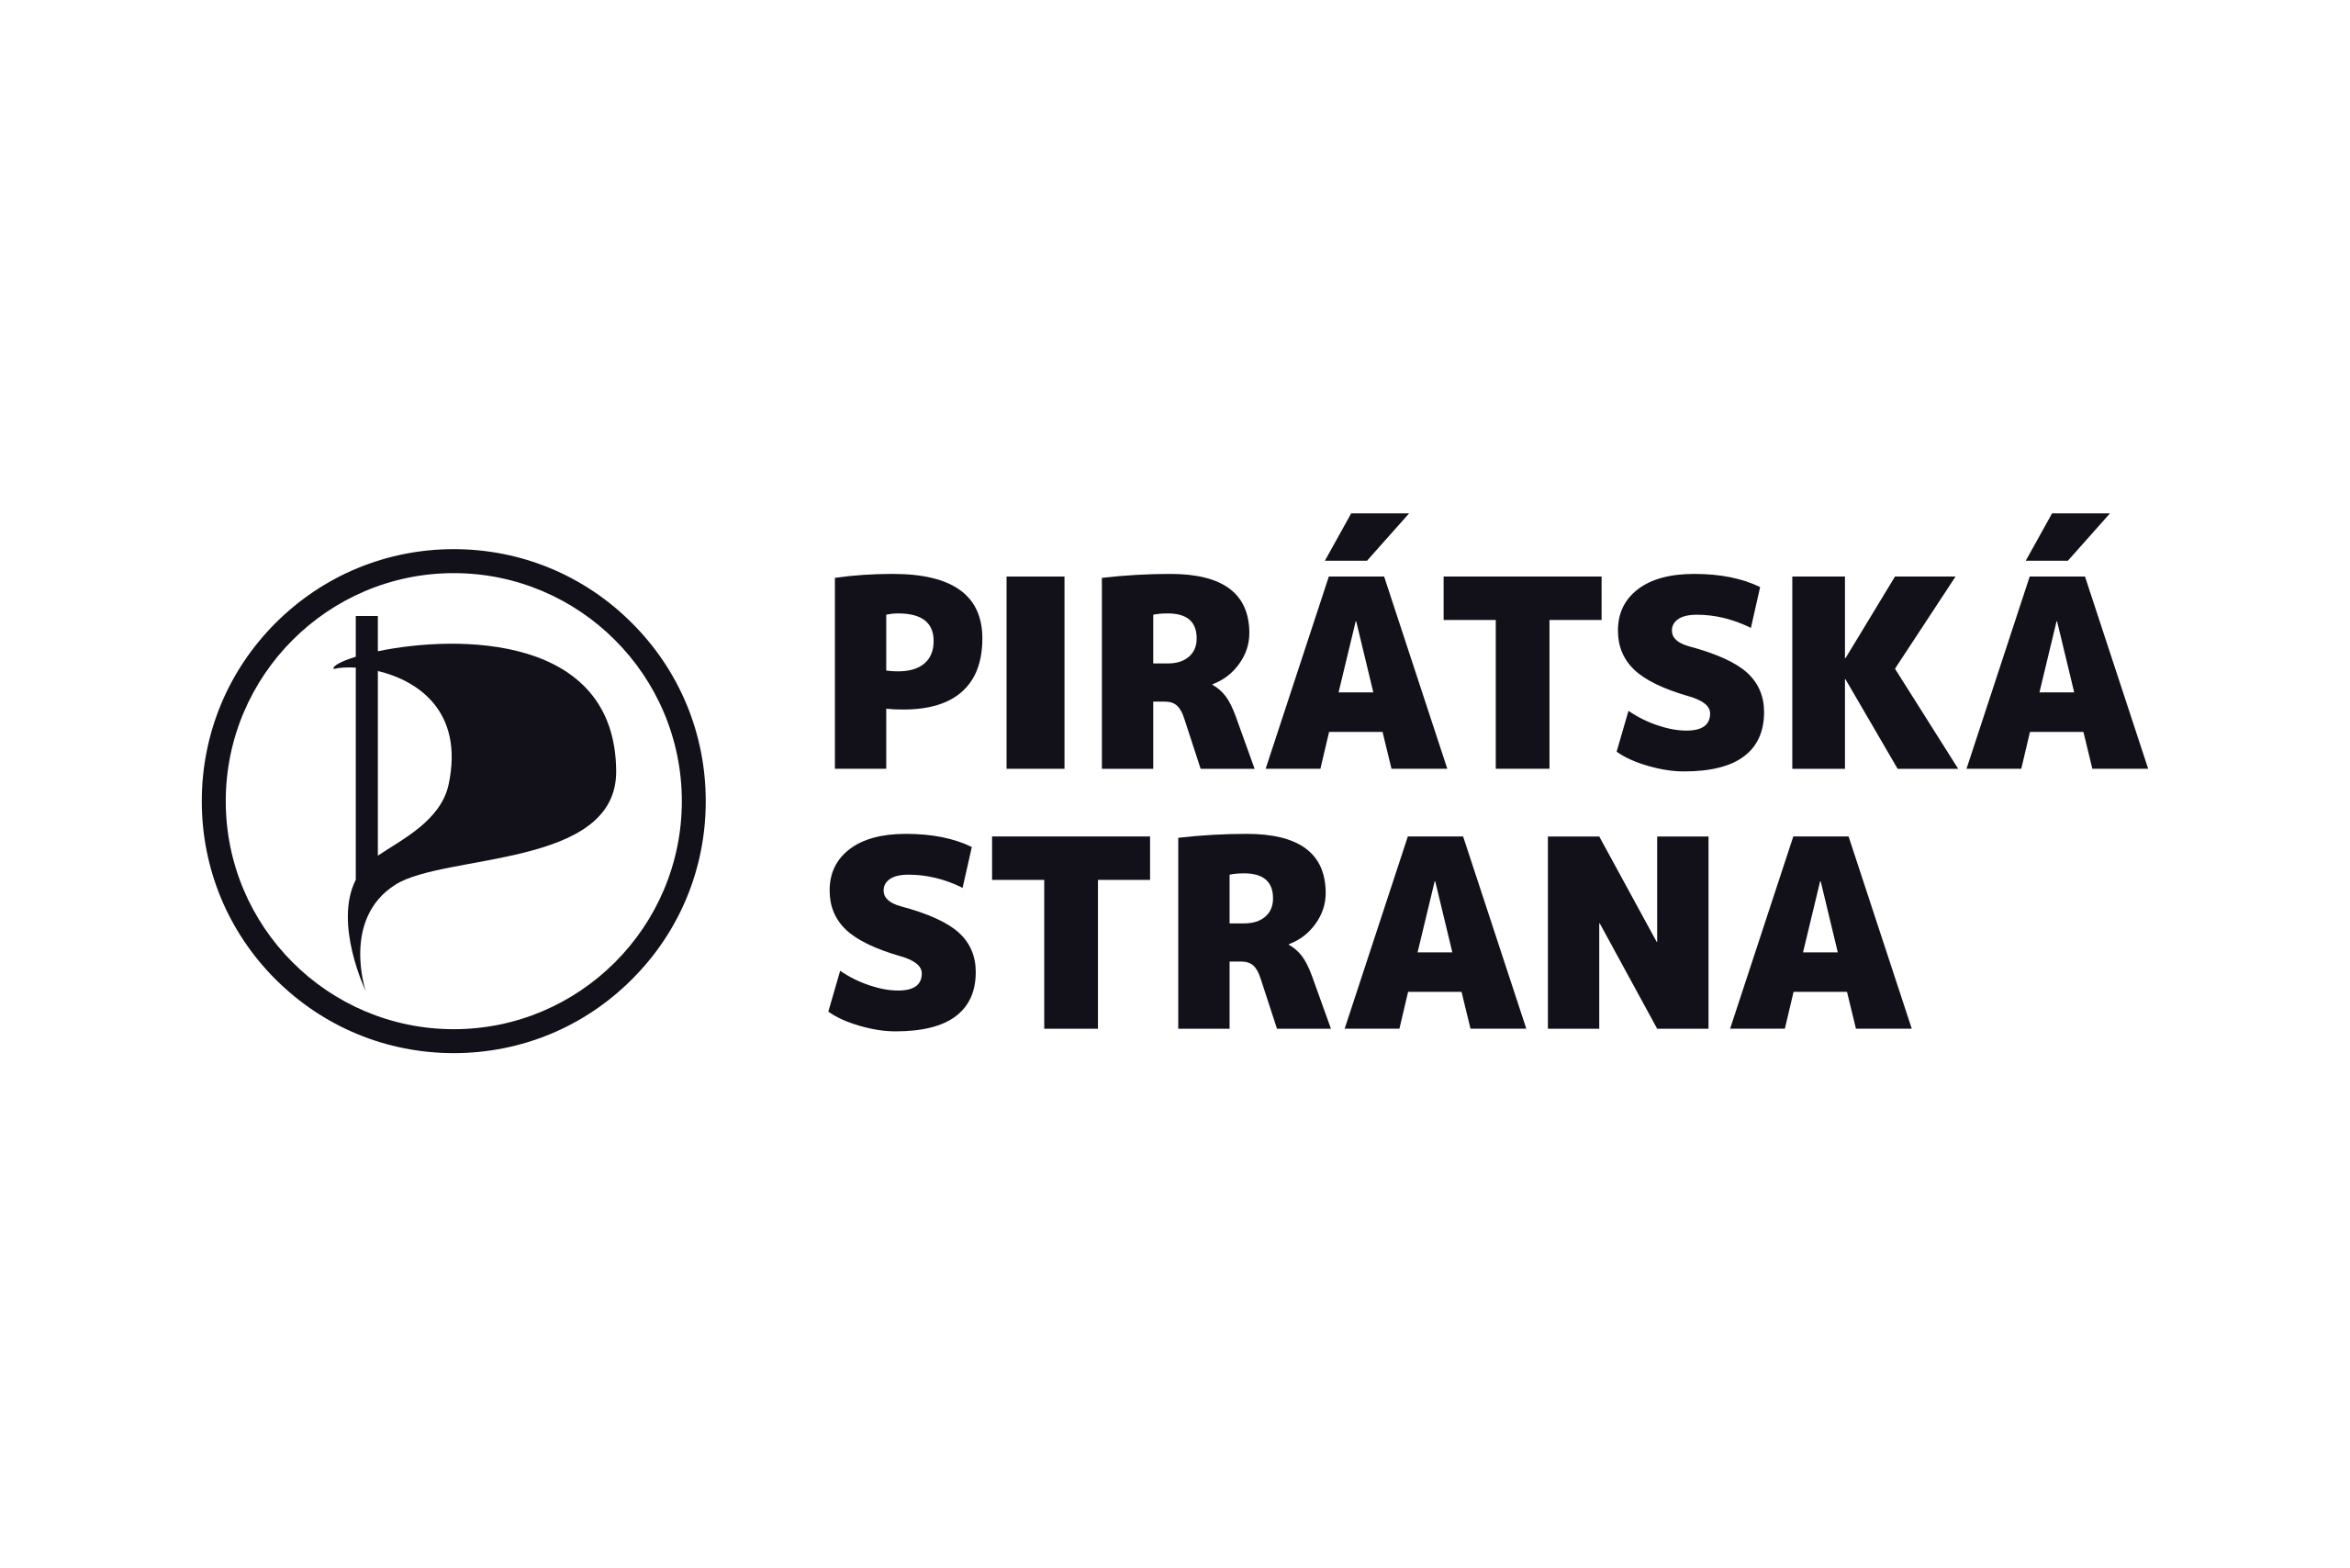 The remarkable rise of the Czech Pirate party